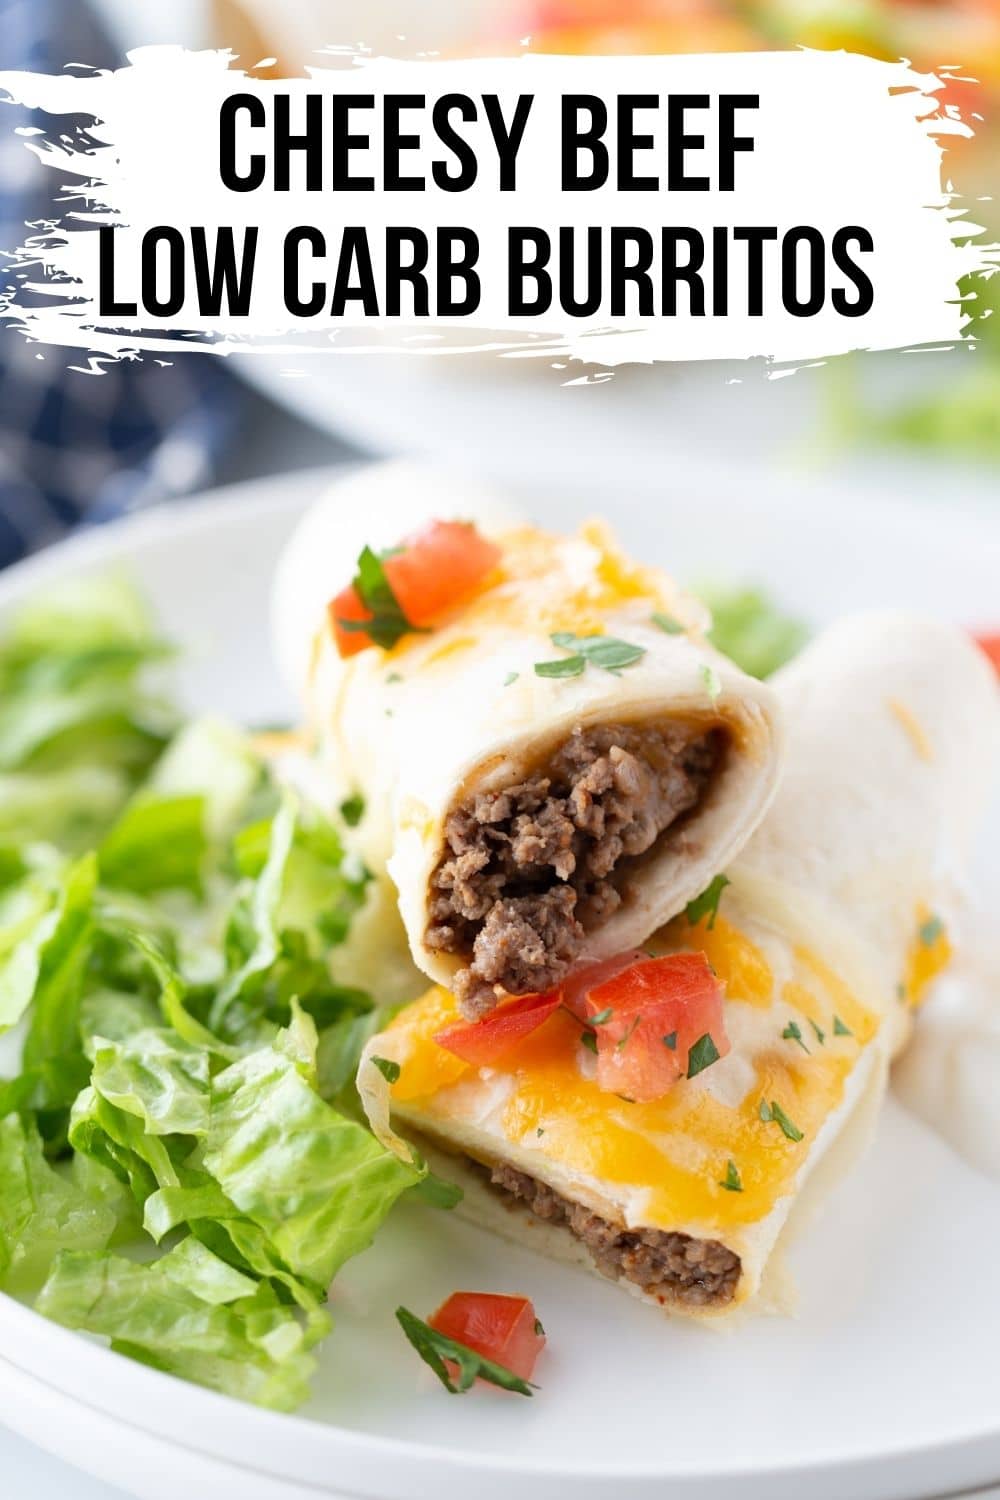 low carb burritos cut open and plated